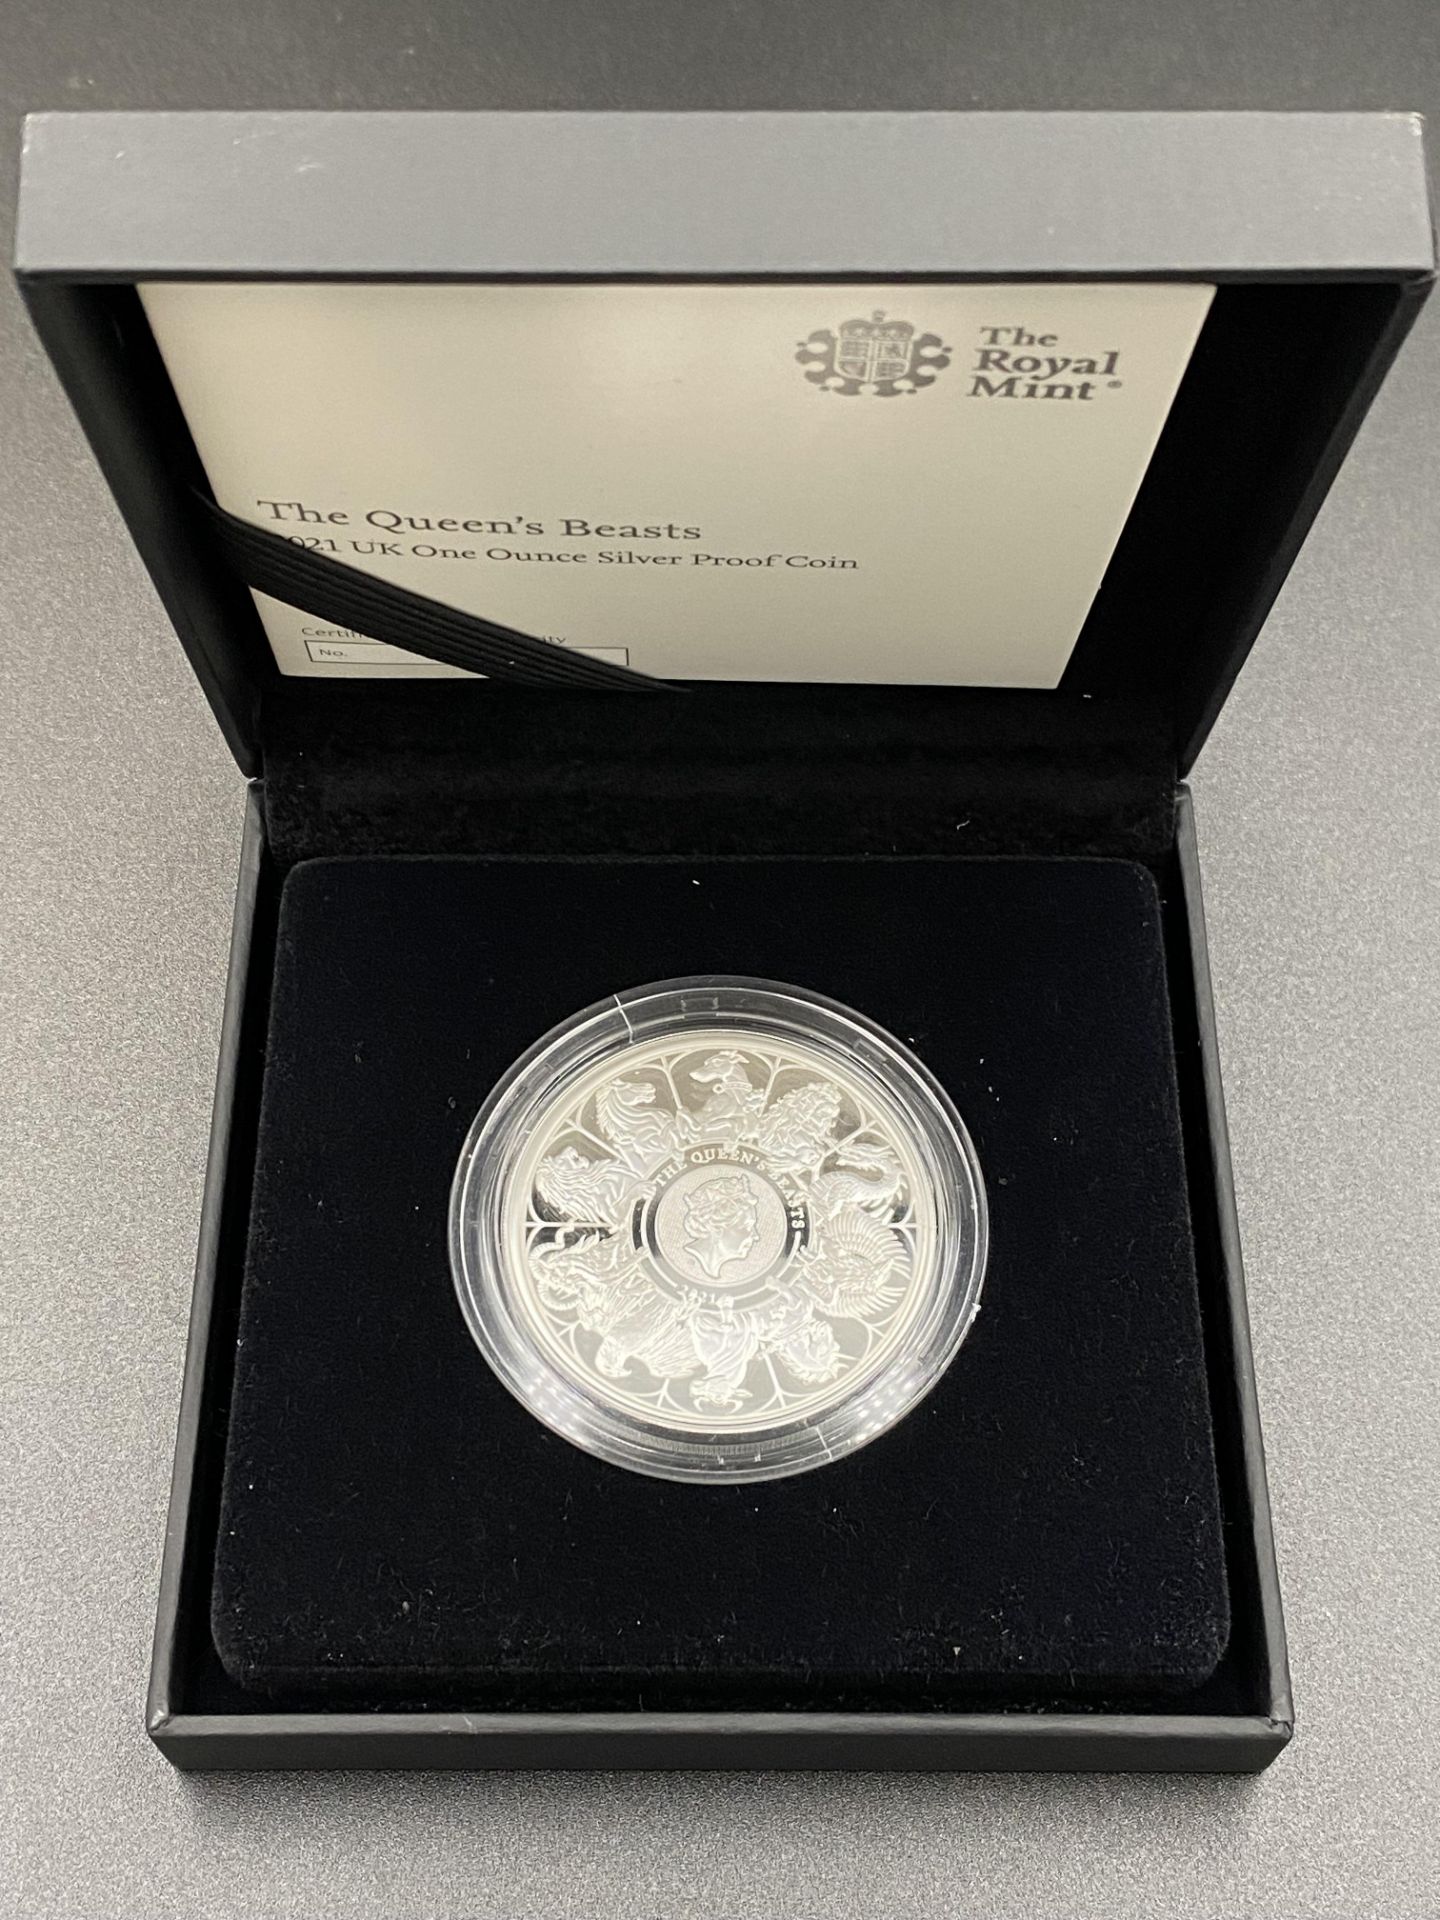 Royal Mint Queen's Beasts 2021 one ounce silver proof coin